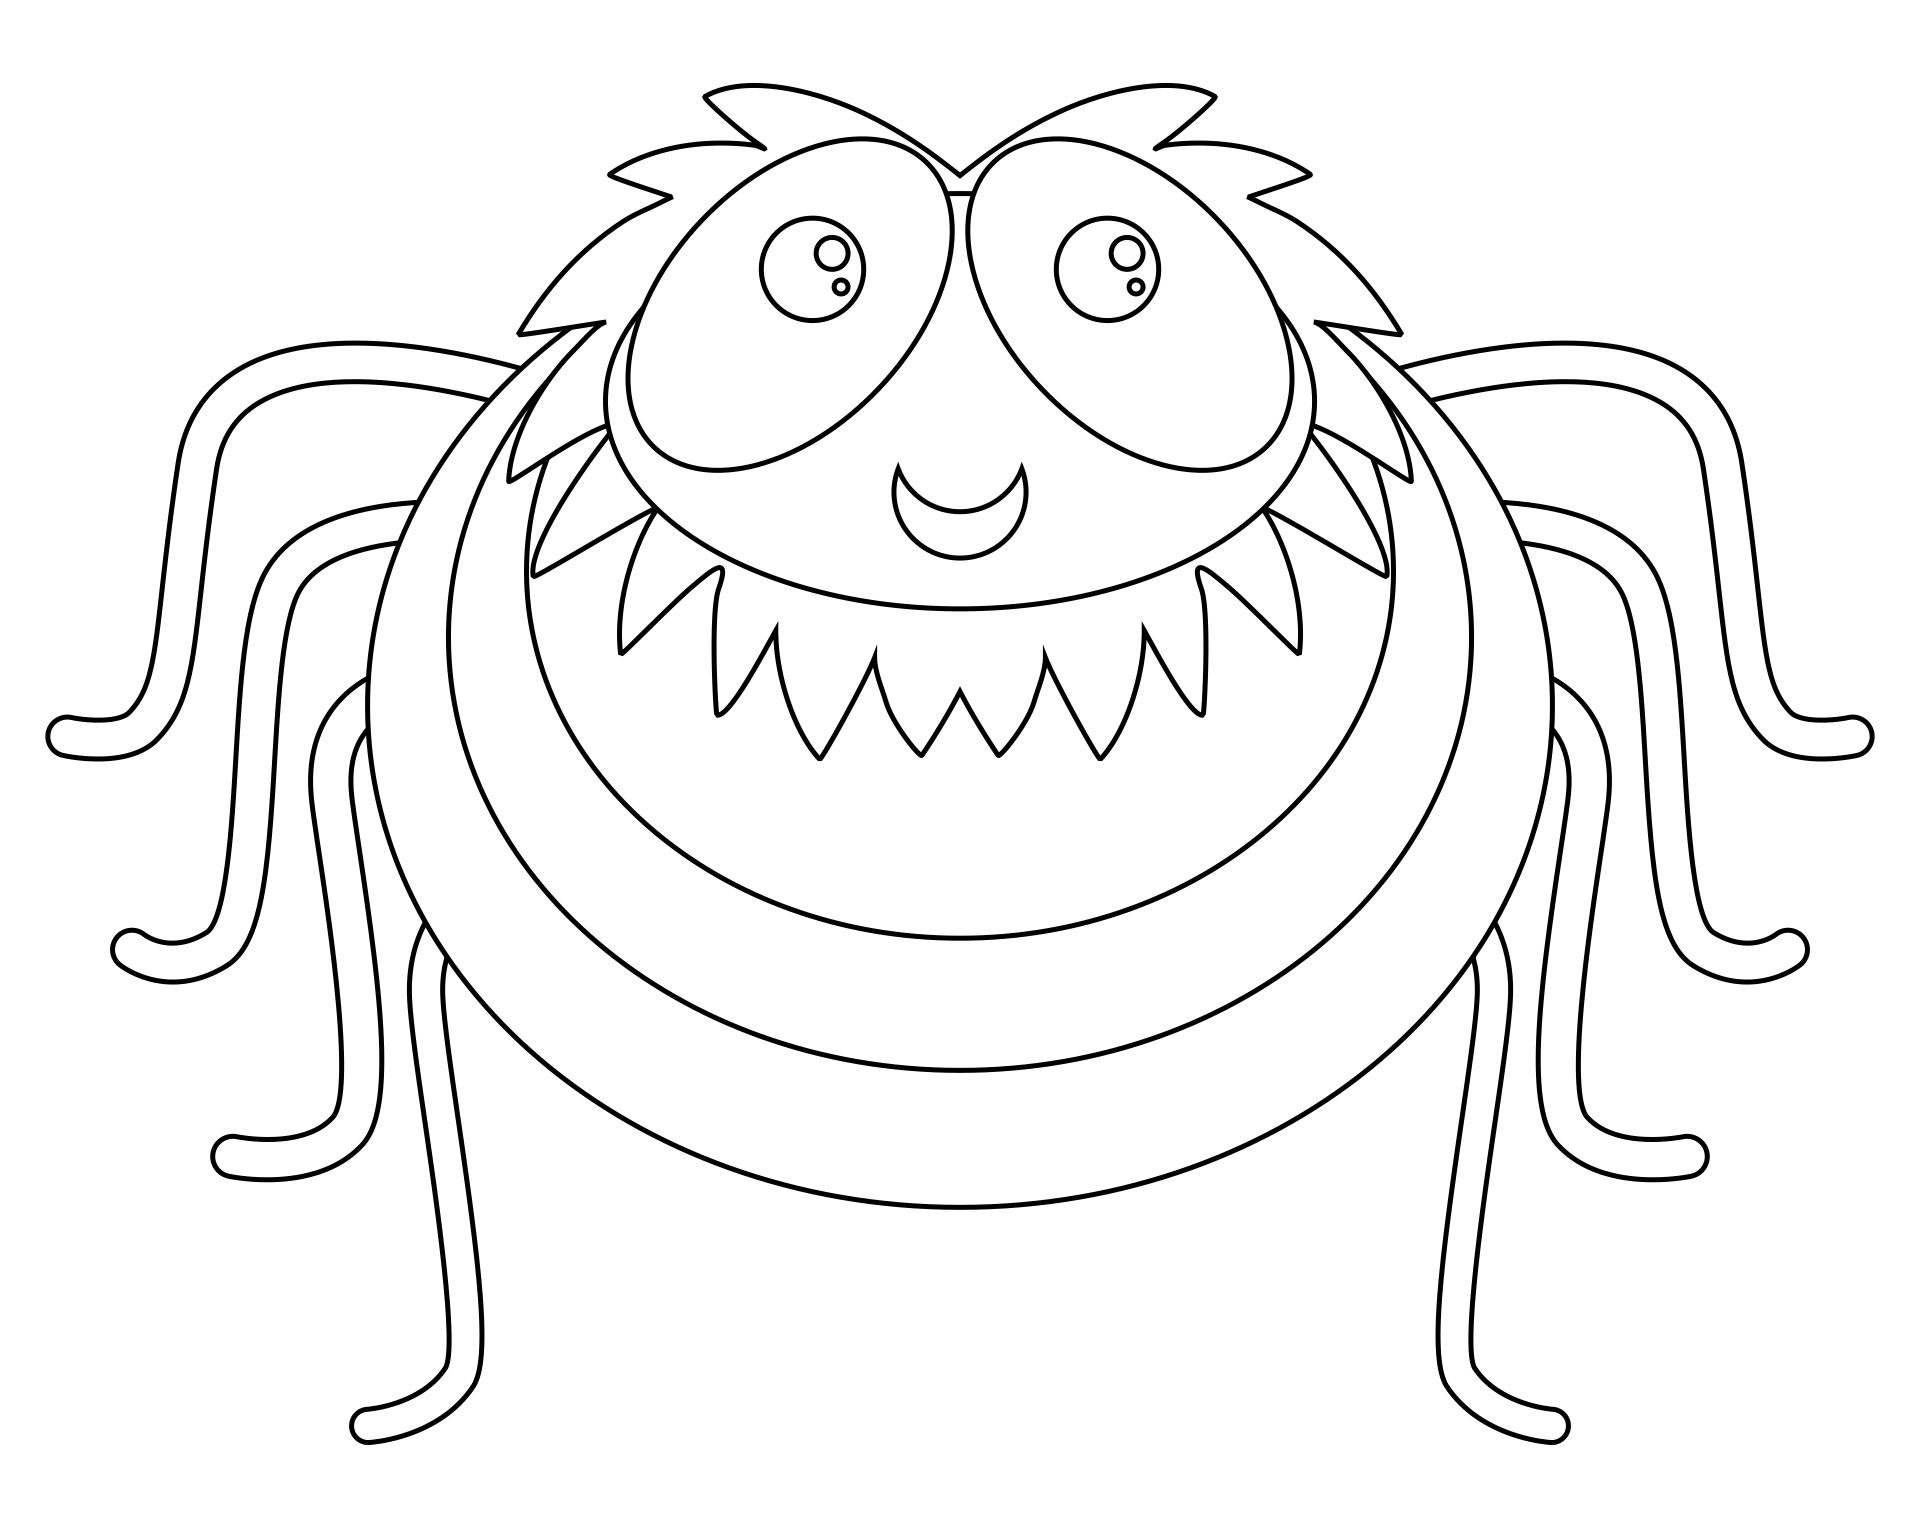 15 Best Halloween Spider Coloring Pages Printable PDF for Free at ...